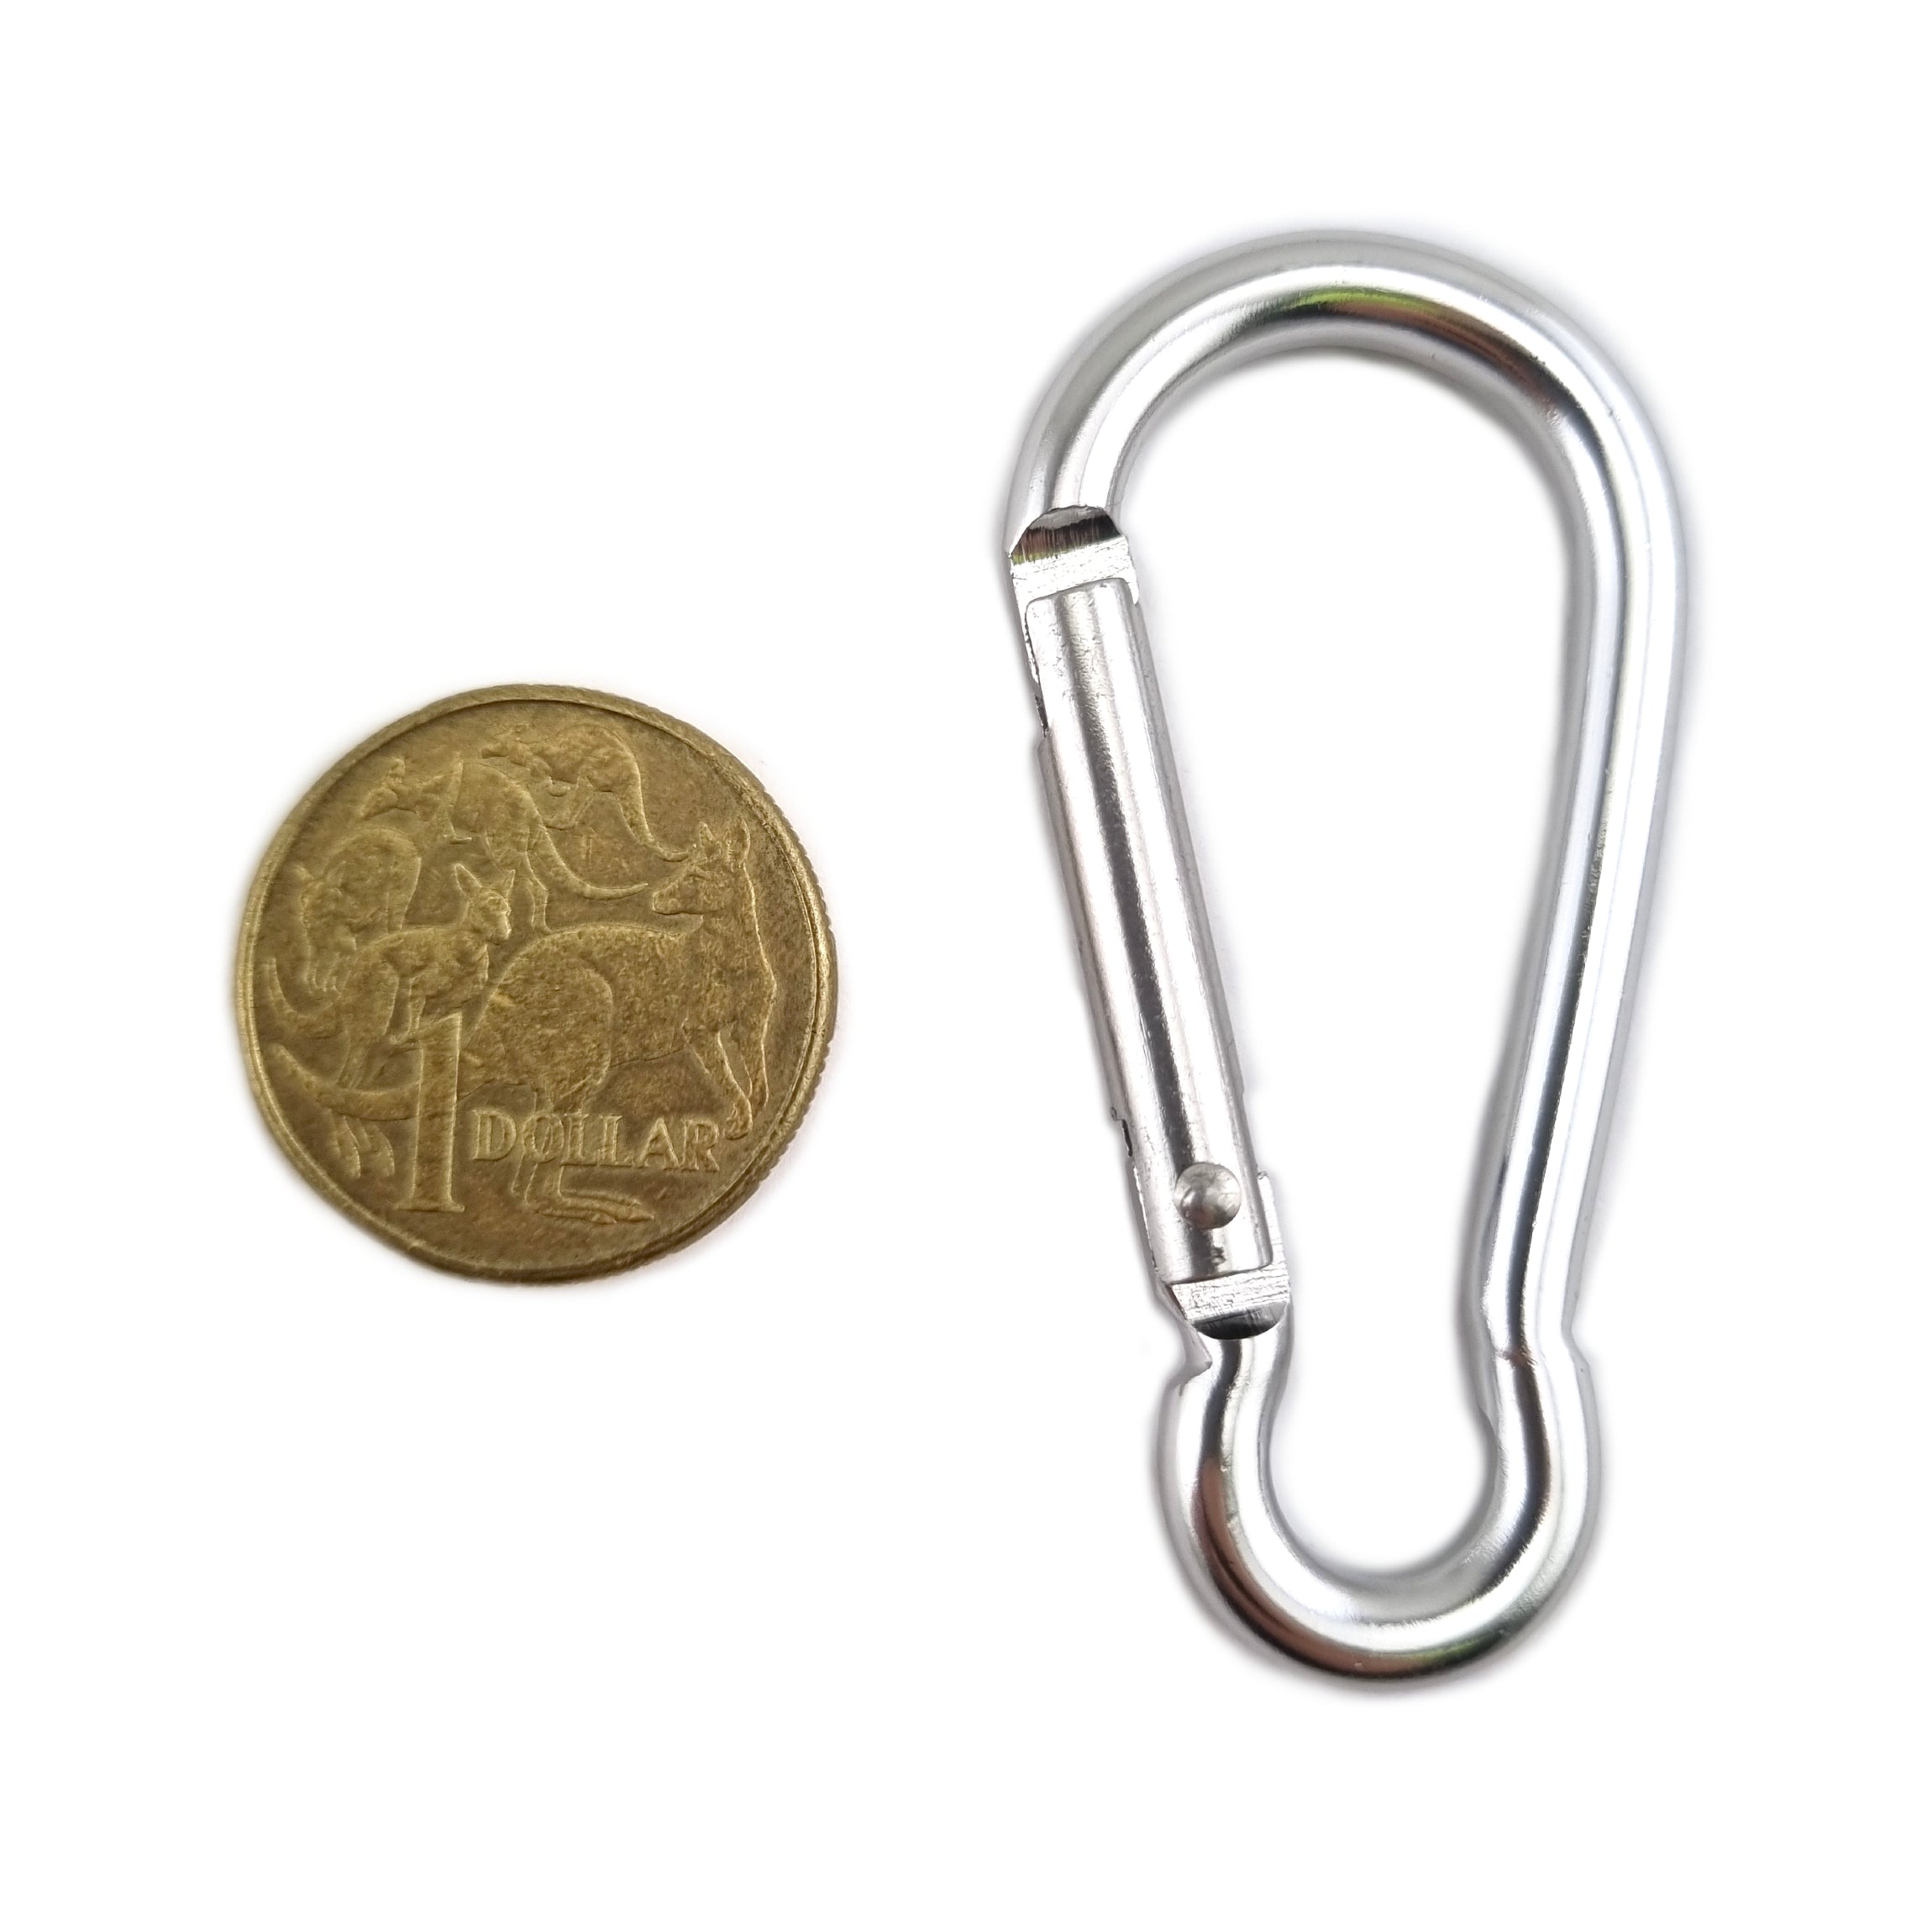 Aluminium snap hook Carabiner in silver, size 5mm, untested. Shop hardware online at chain.com.au